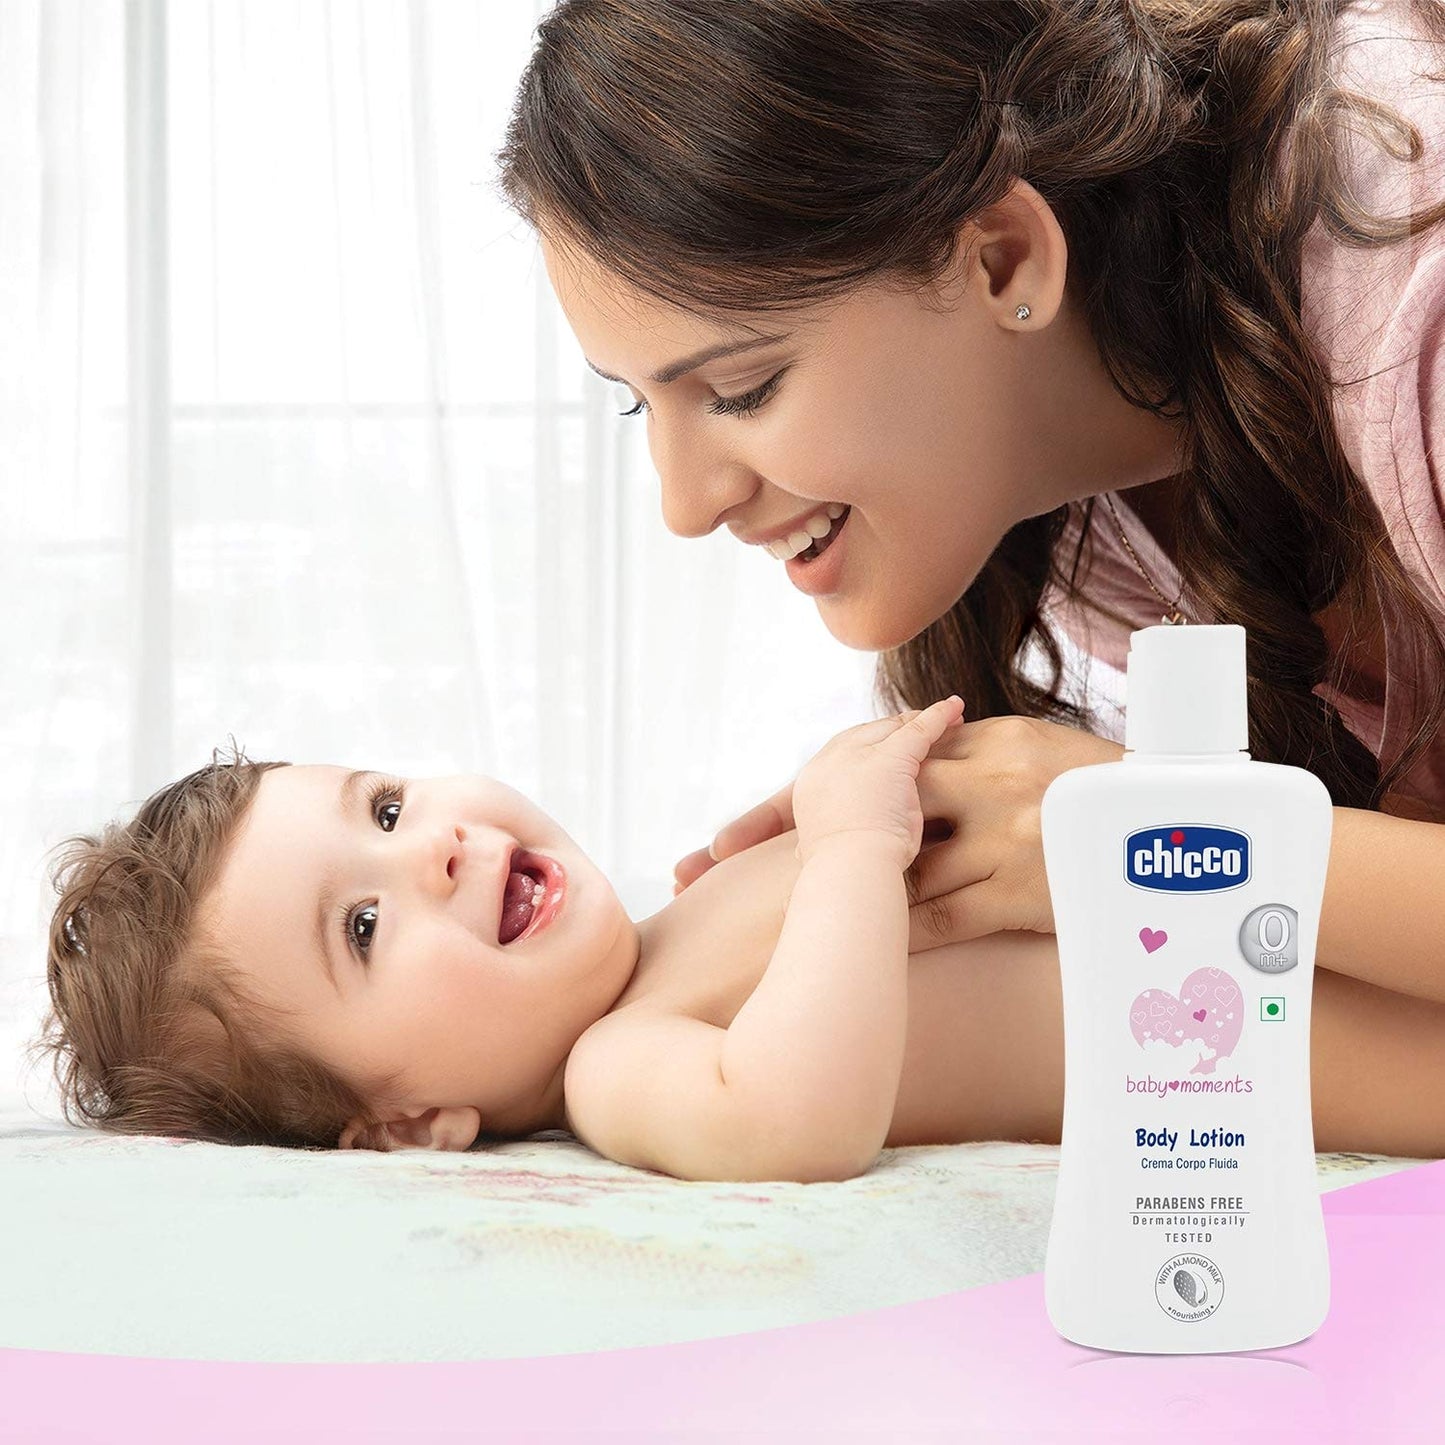 Chicco Baby Moments Body Lotion For Baby Skin 0M+ 200Ml